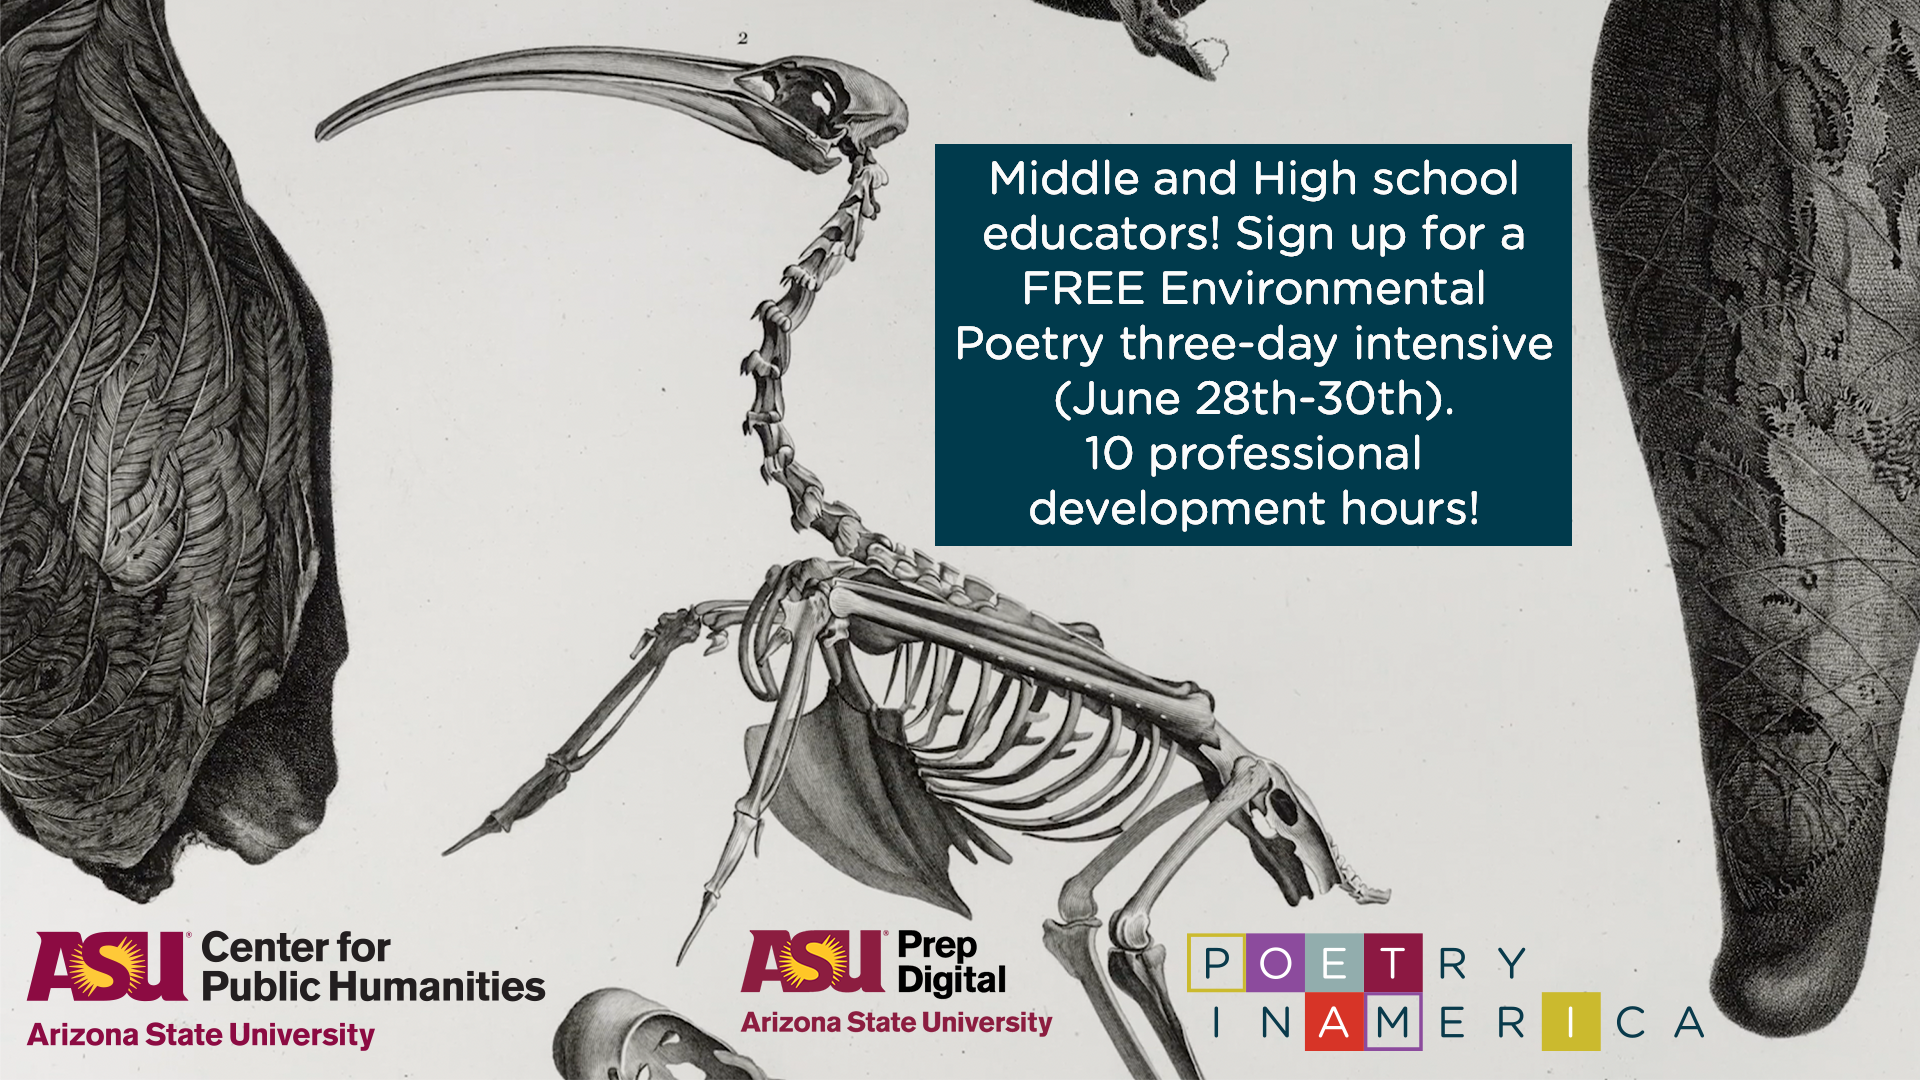 A brochure promoting a free three-day intensive workshop in Envrionemntal Poetry for middle and high-school educators, offering 10 professional development hours, pictured: a black and white illustration of fossils including a bird.